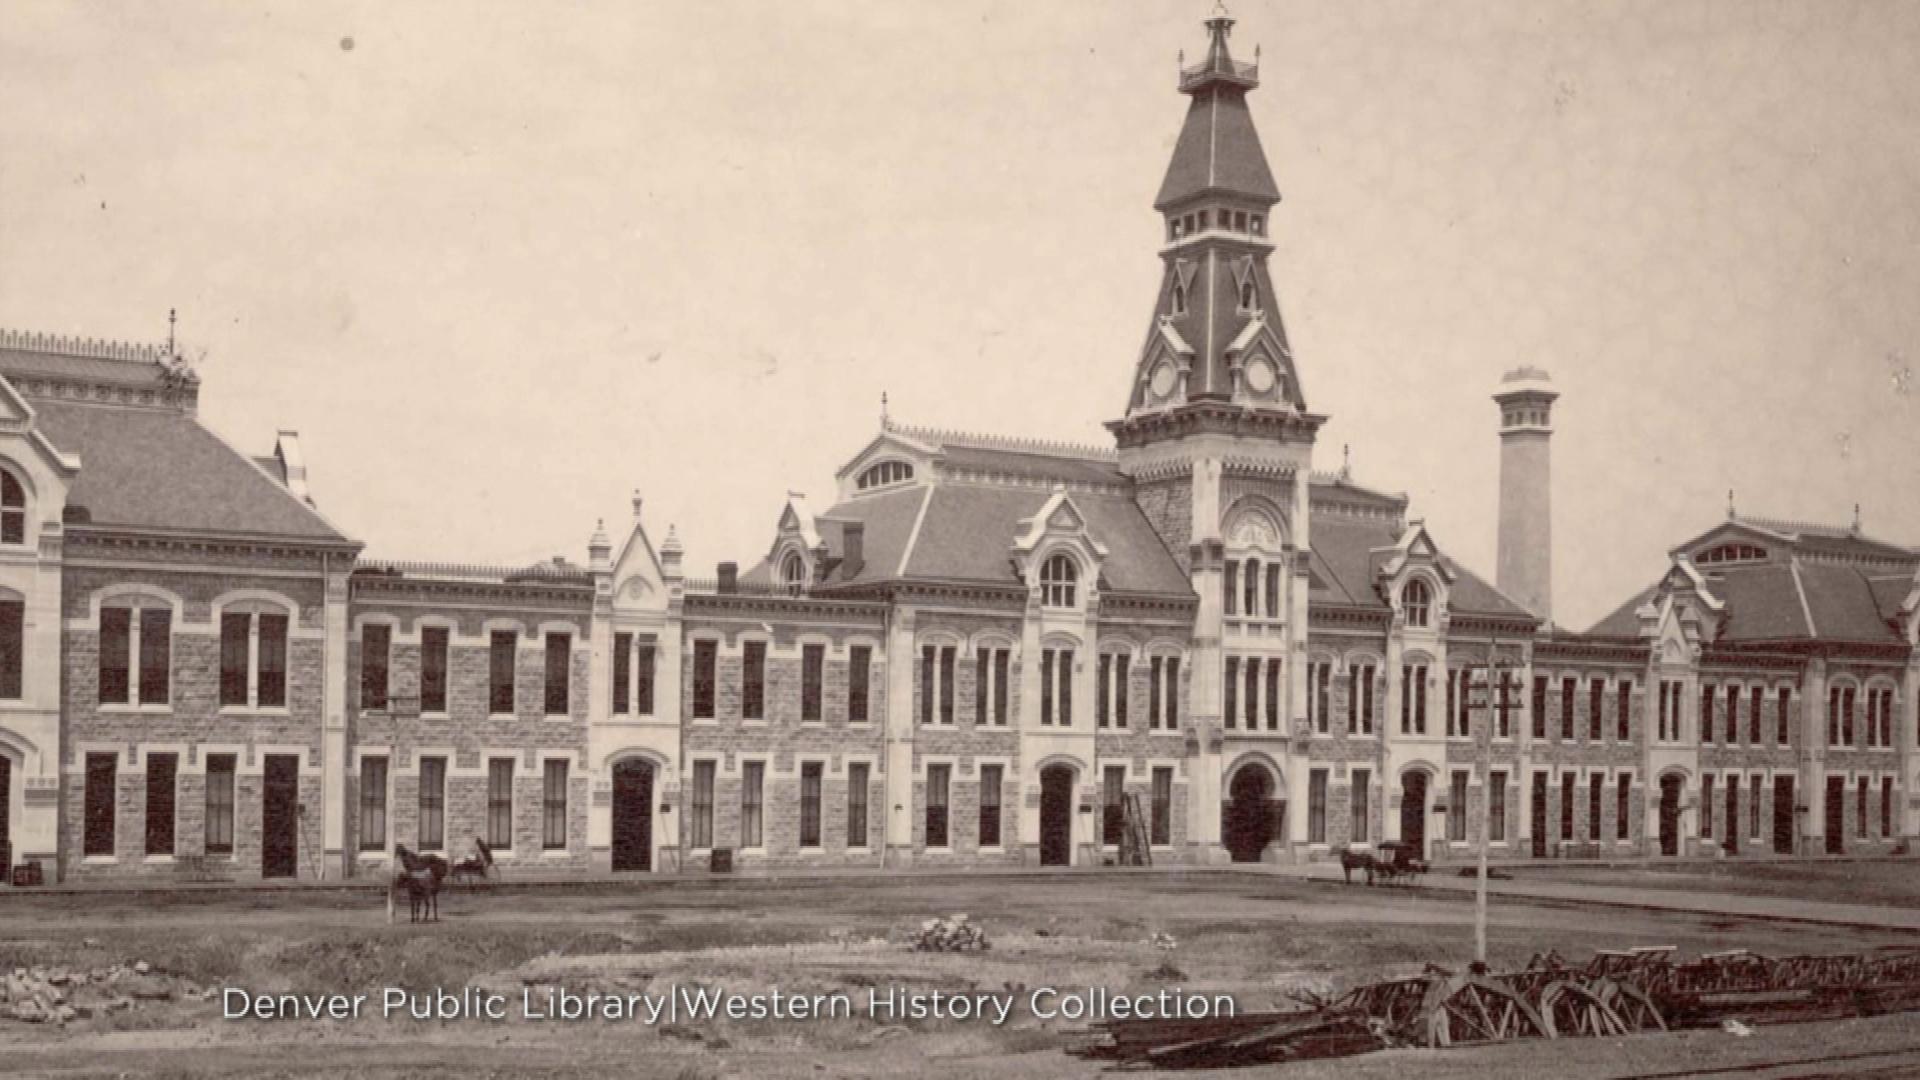 Union Station with original tower (credit: Denver Public Library, Western History Collection)